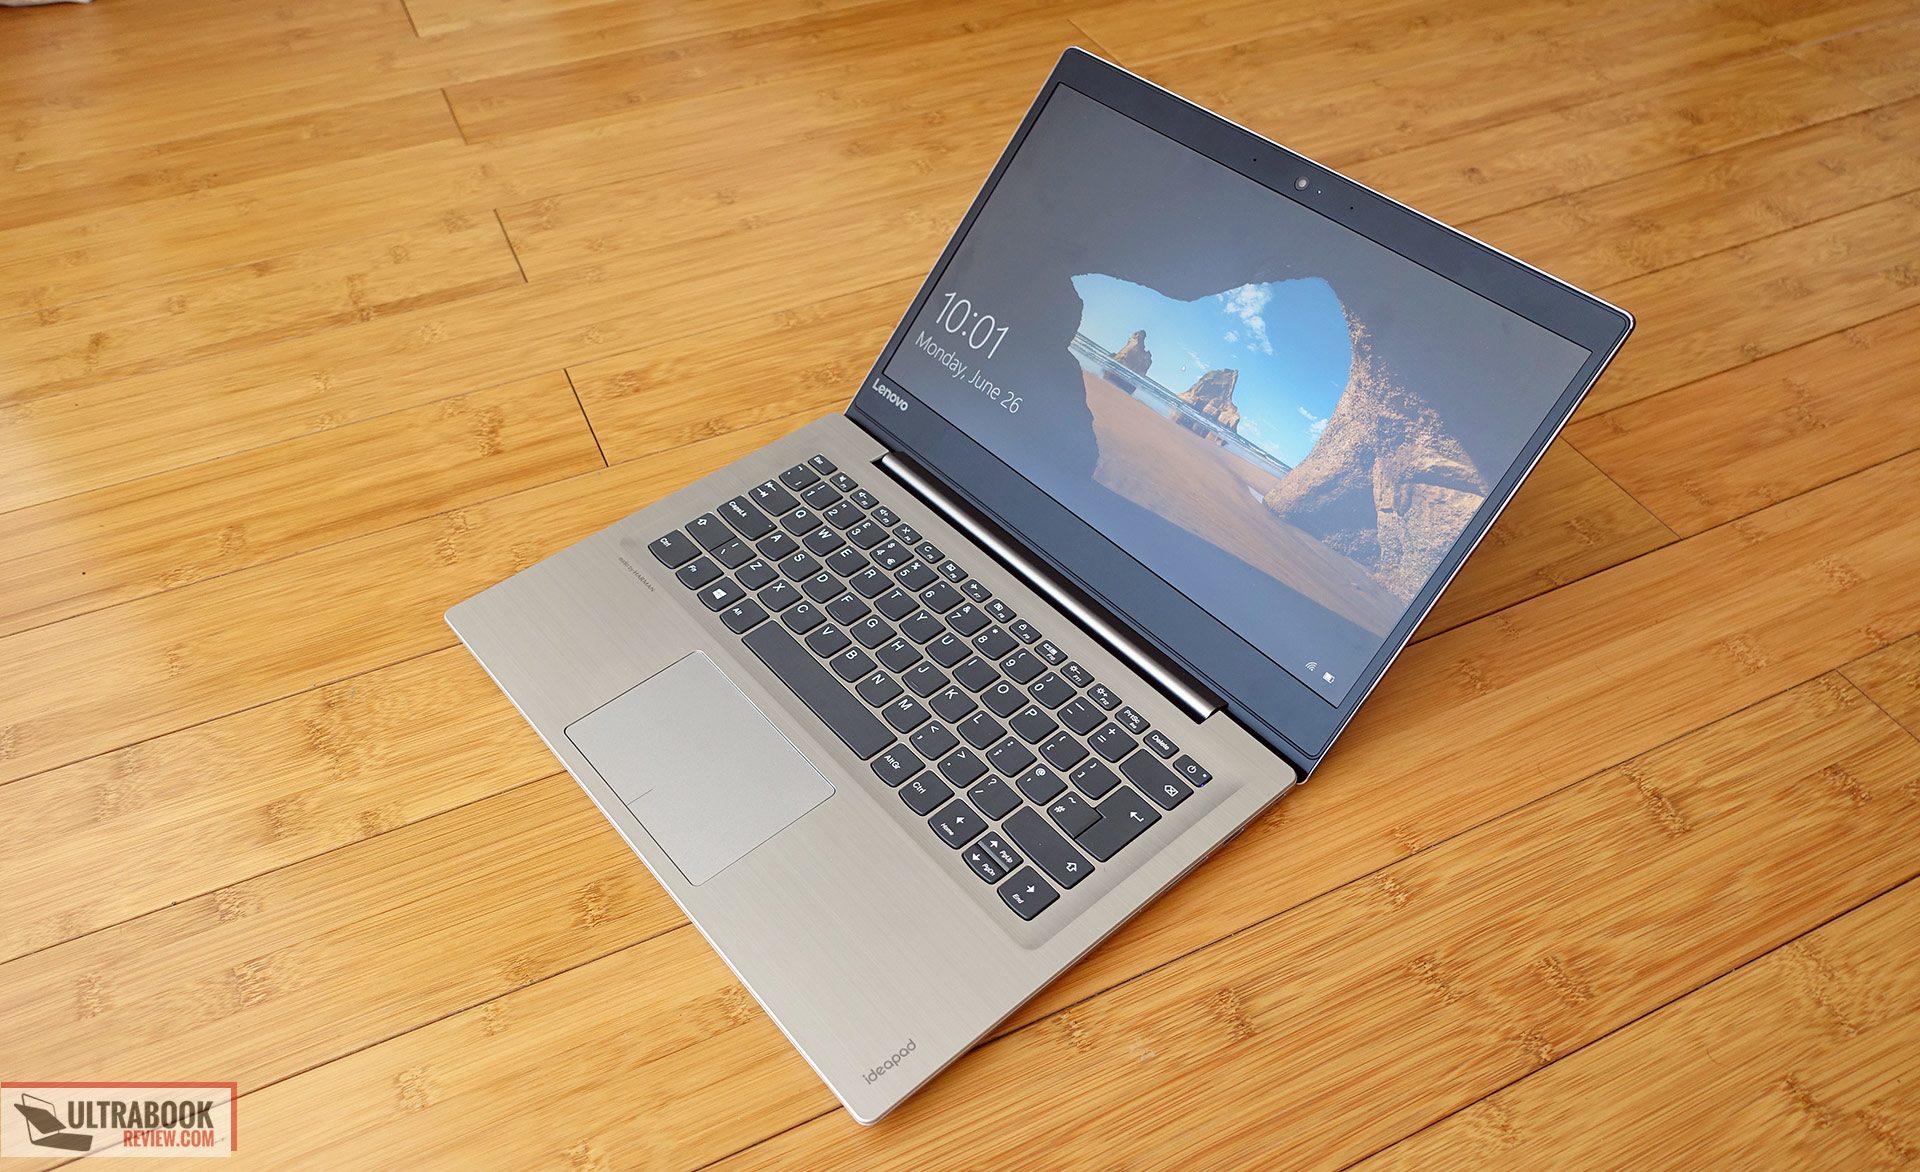 paz Anoi clima Lenovo IdeaPad 320S review - affordable and compact 14-inch notebook